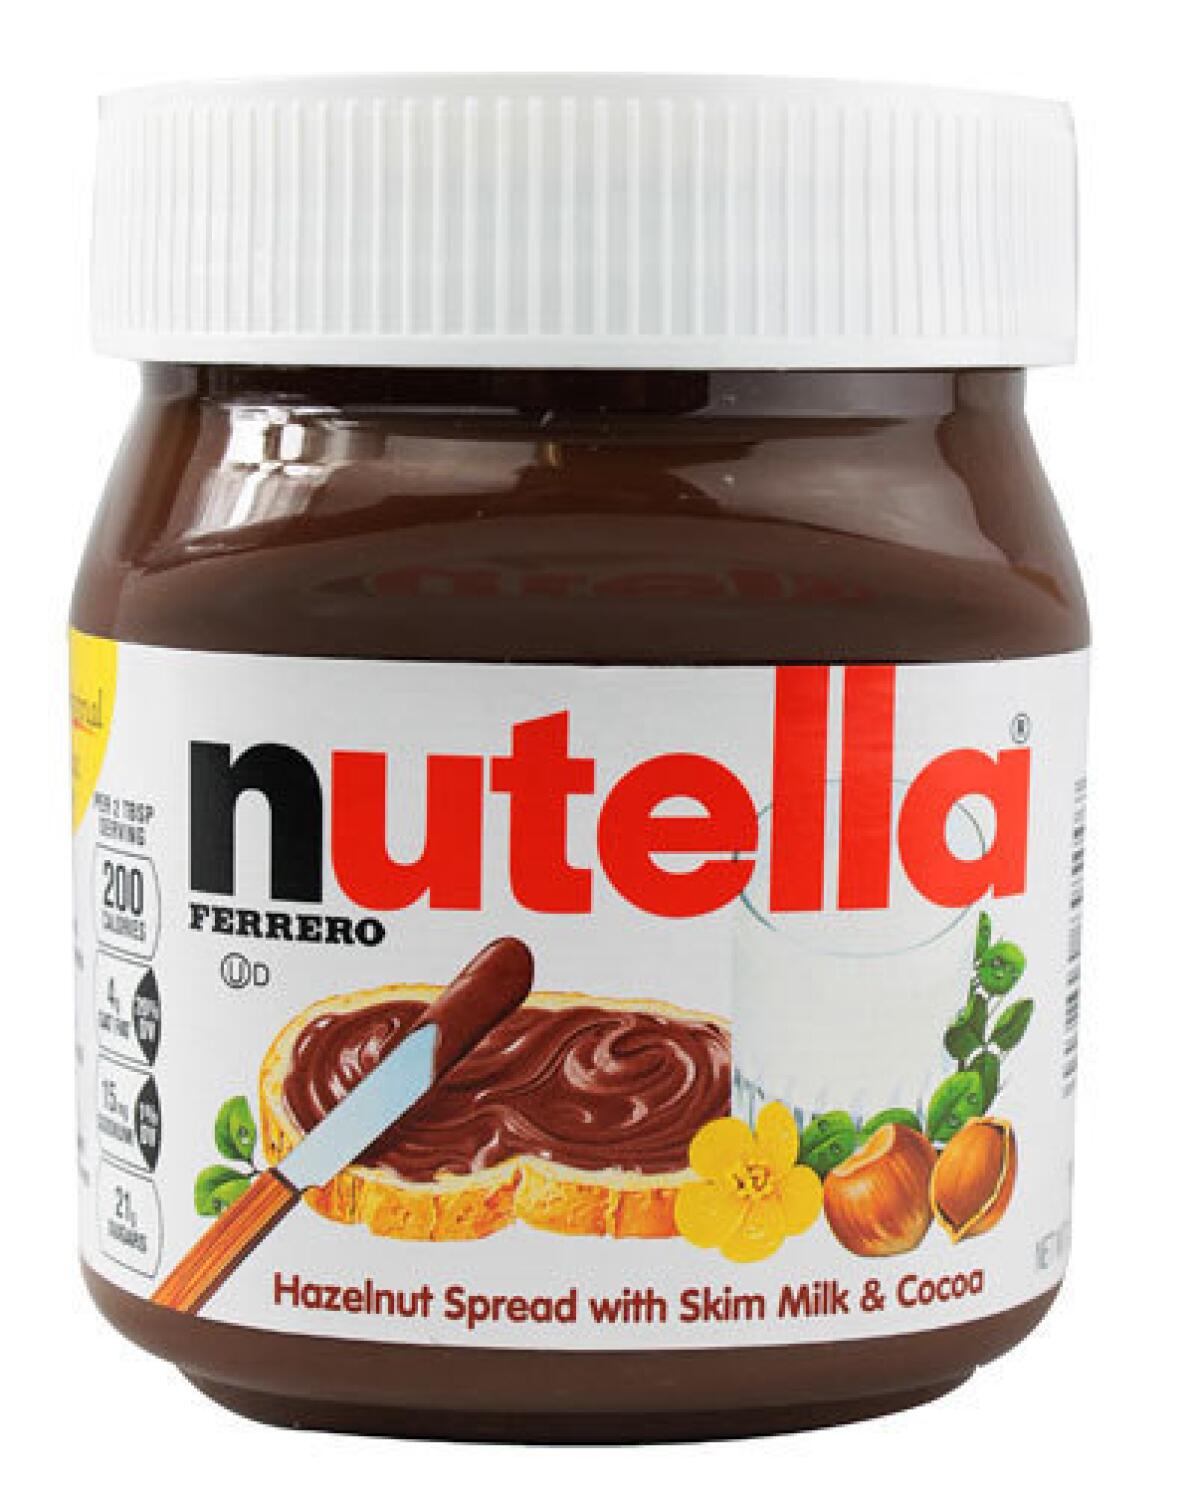 Among the world's wealthiest people, according to Forbes' annual list, is the family that owns the maker of Nutella.